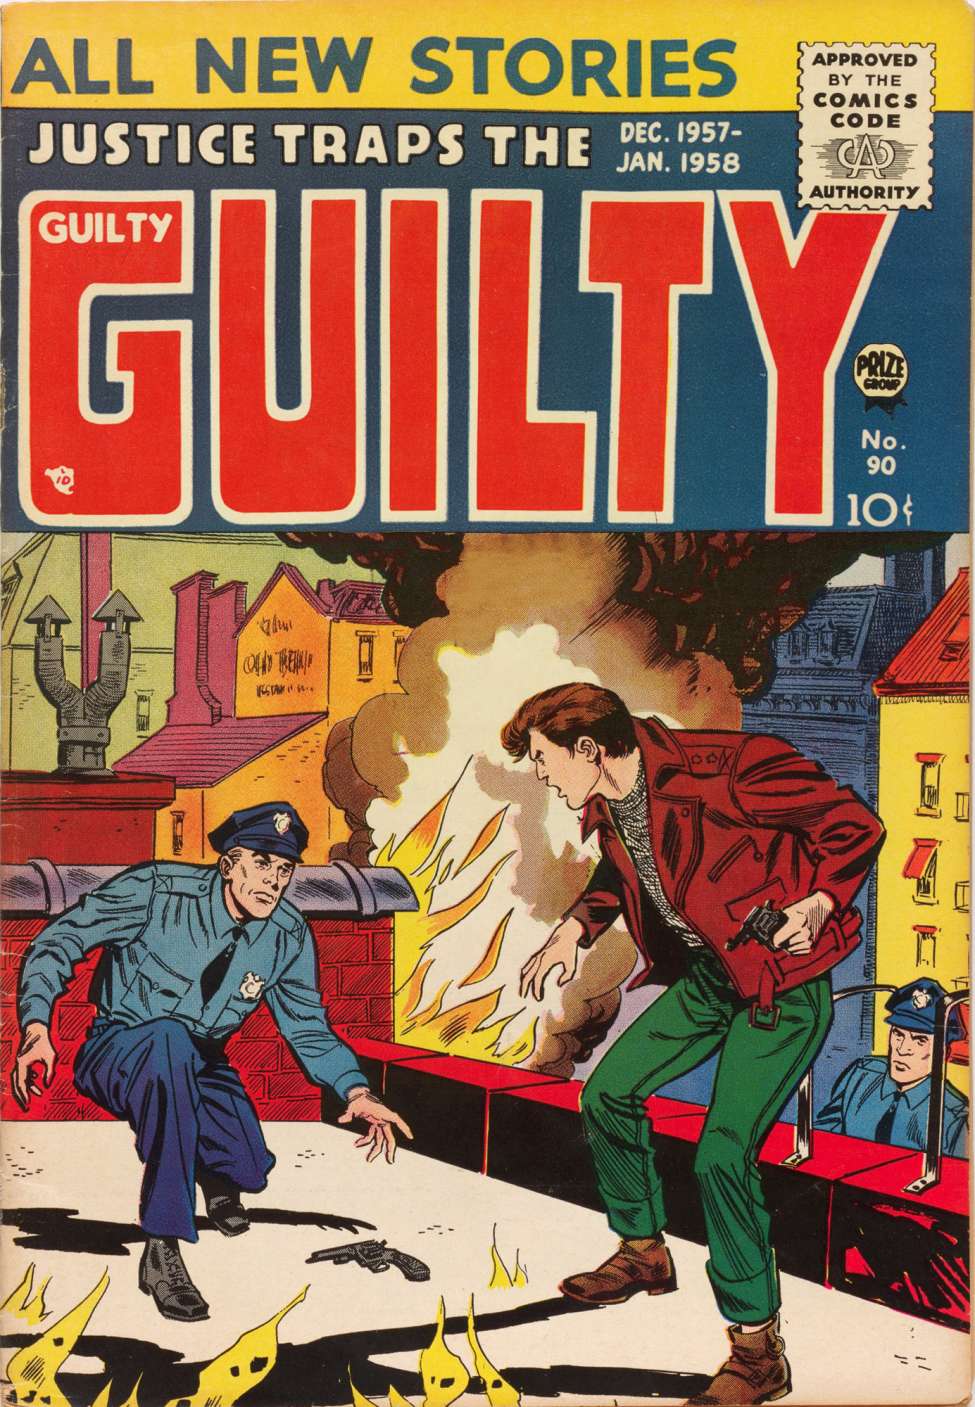 Book Cover For Justice Traps the Guilty 90 (alt)